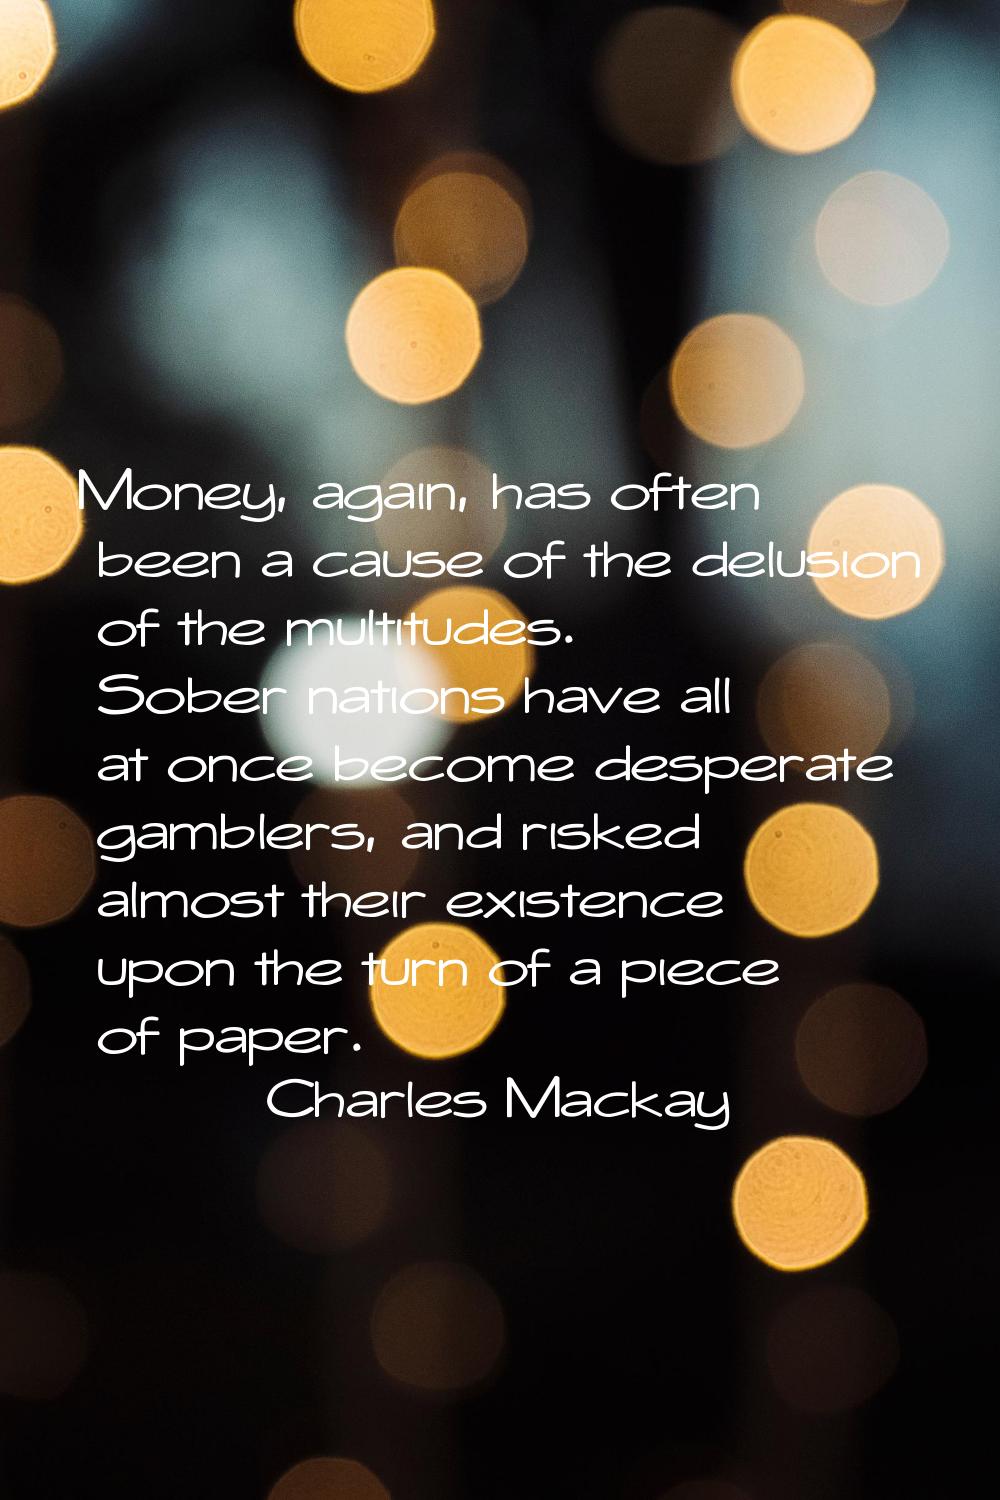 Money, again, has often been a cause of the delusion of the multitudes. Sober nations have all at o